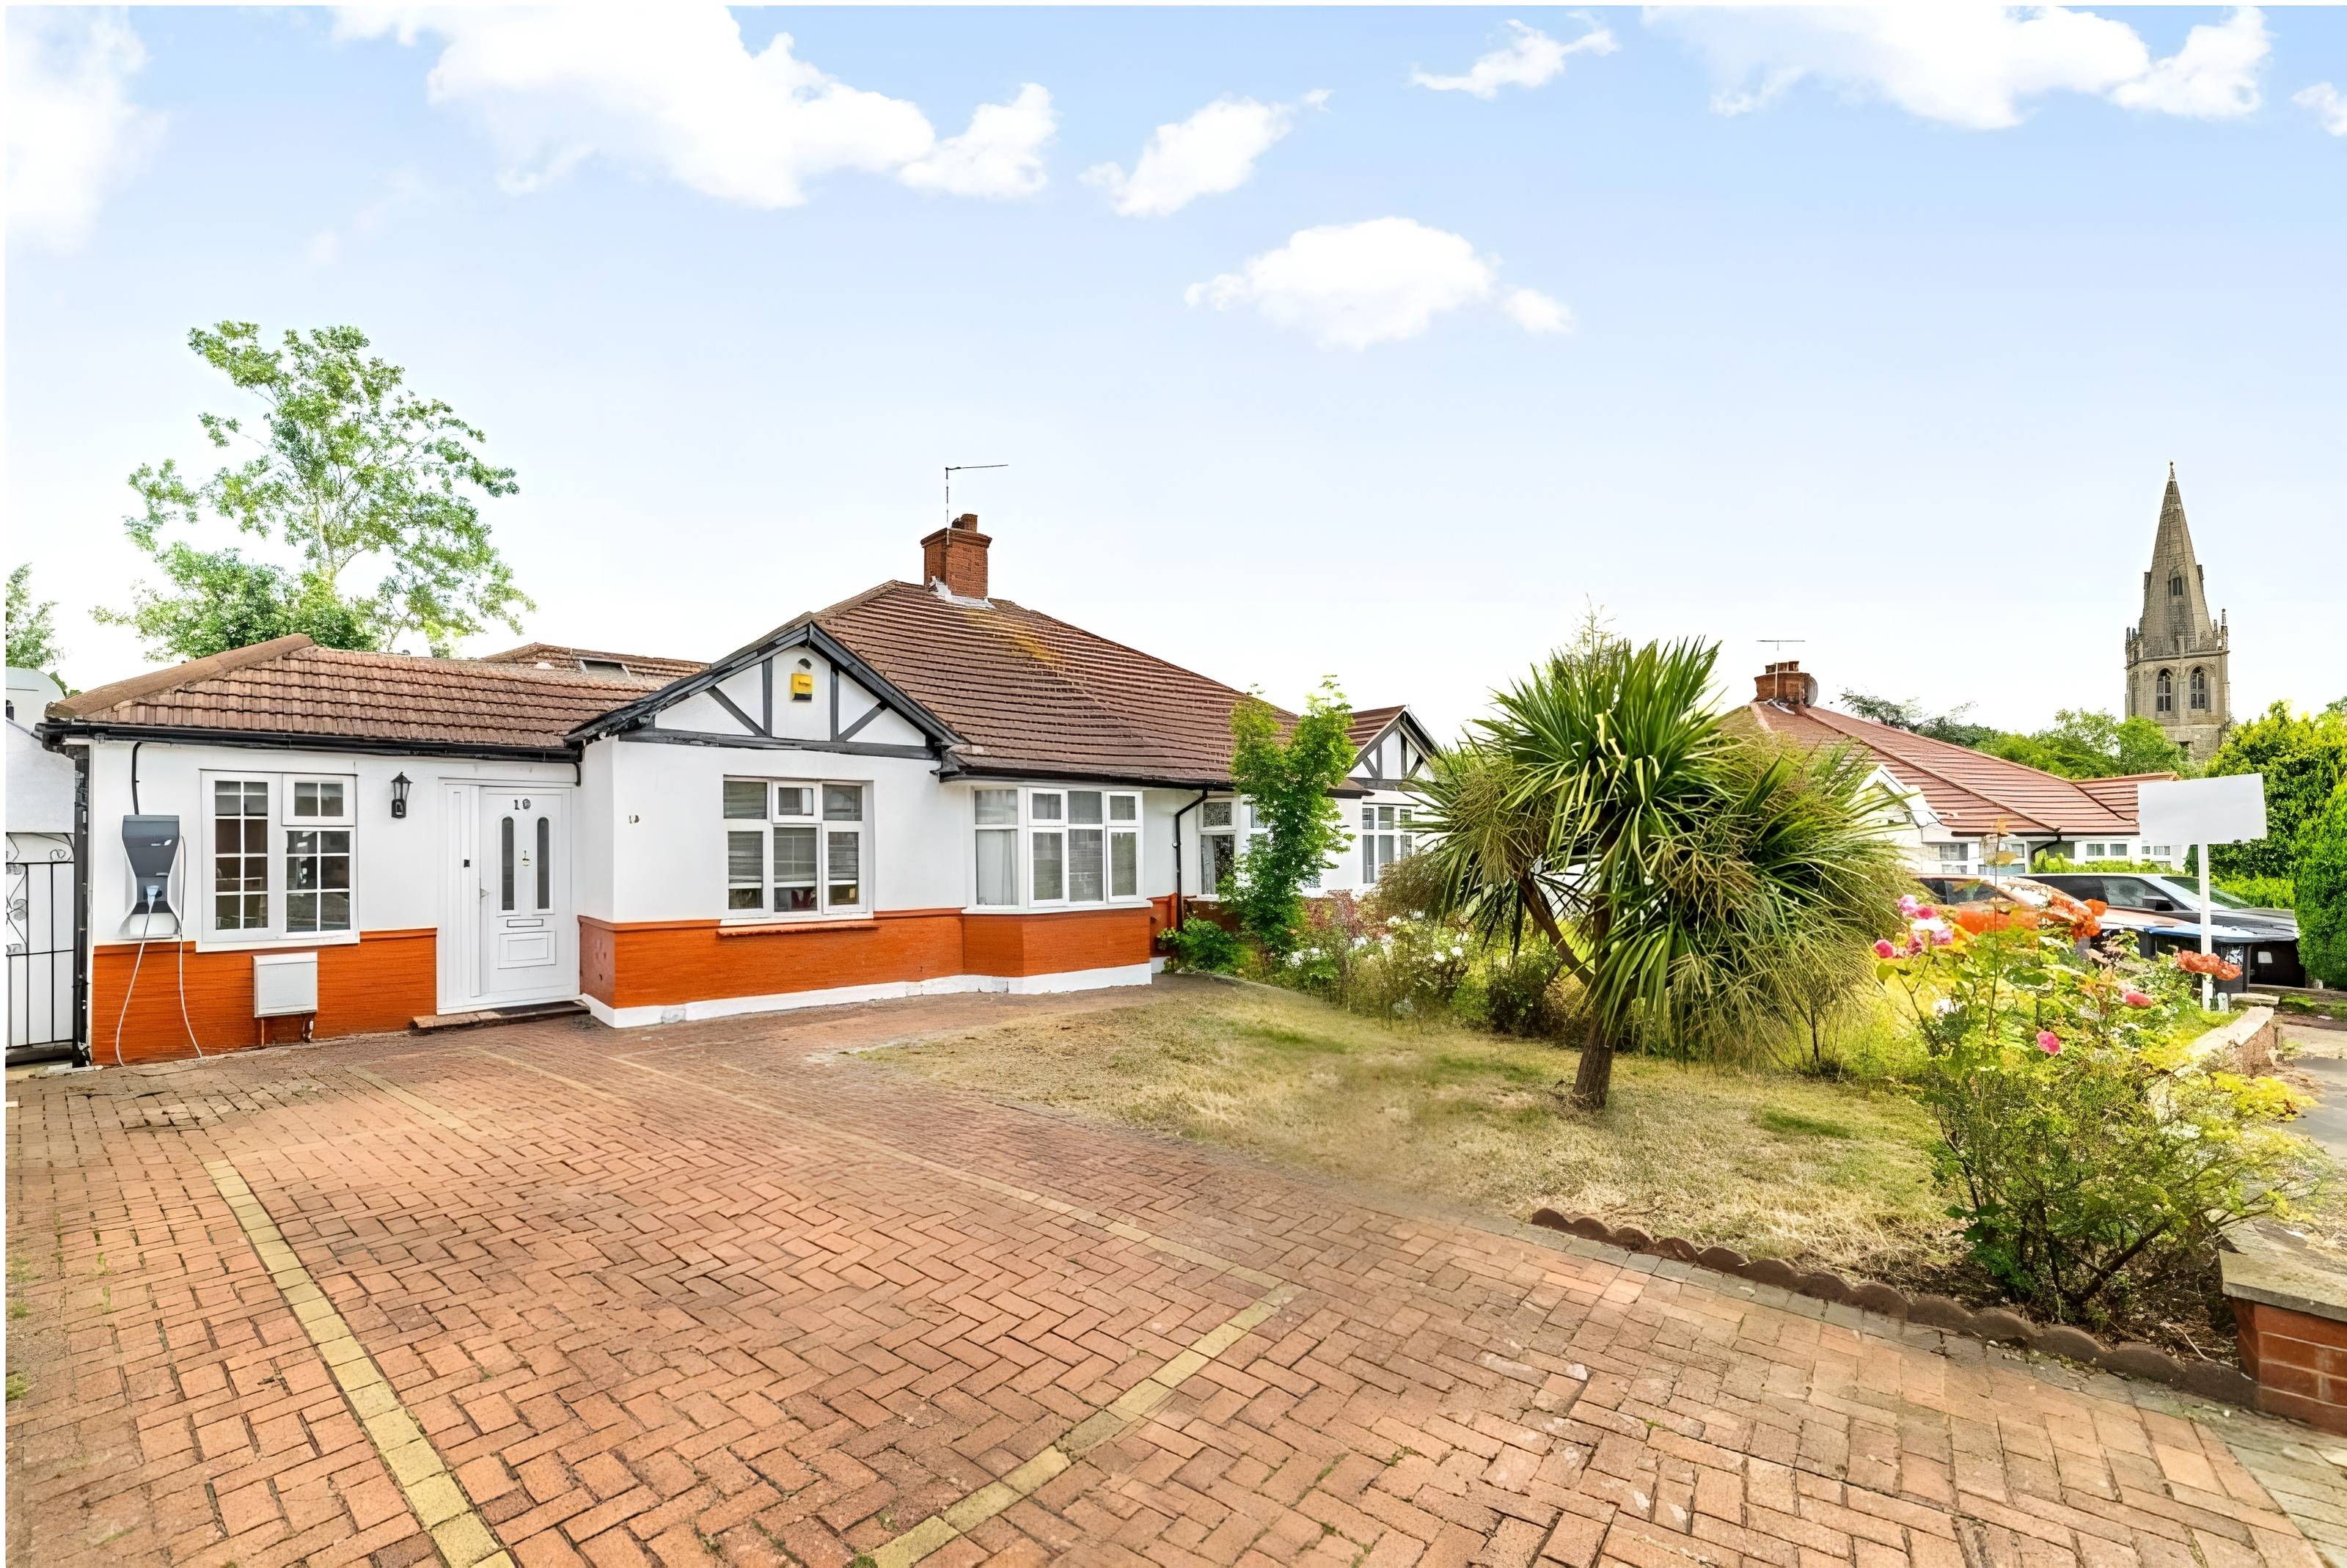 Incredible Rare-to-Market 3 Bedroom Bungalow For Sale